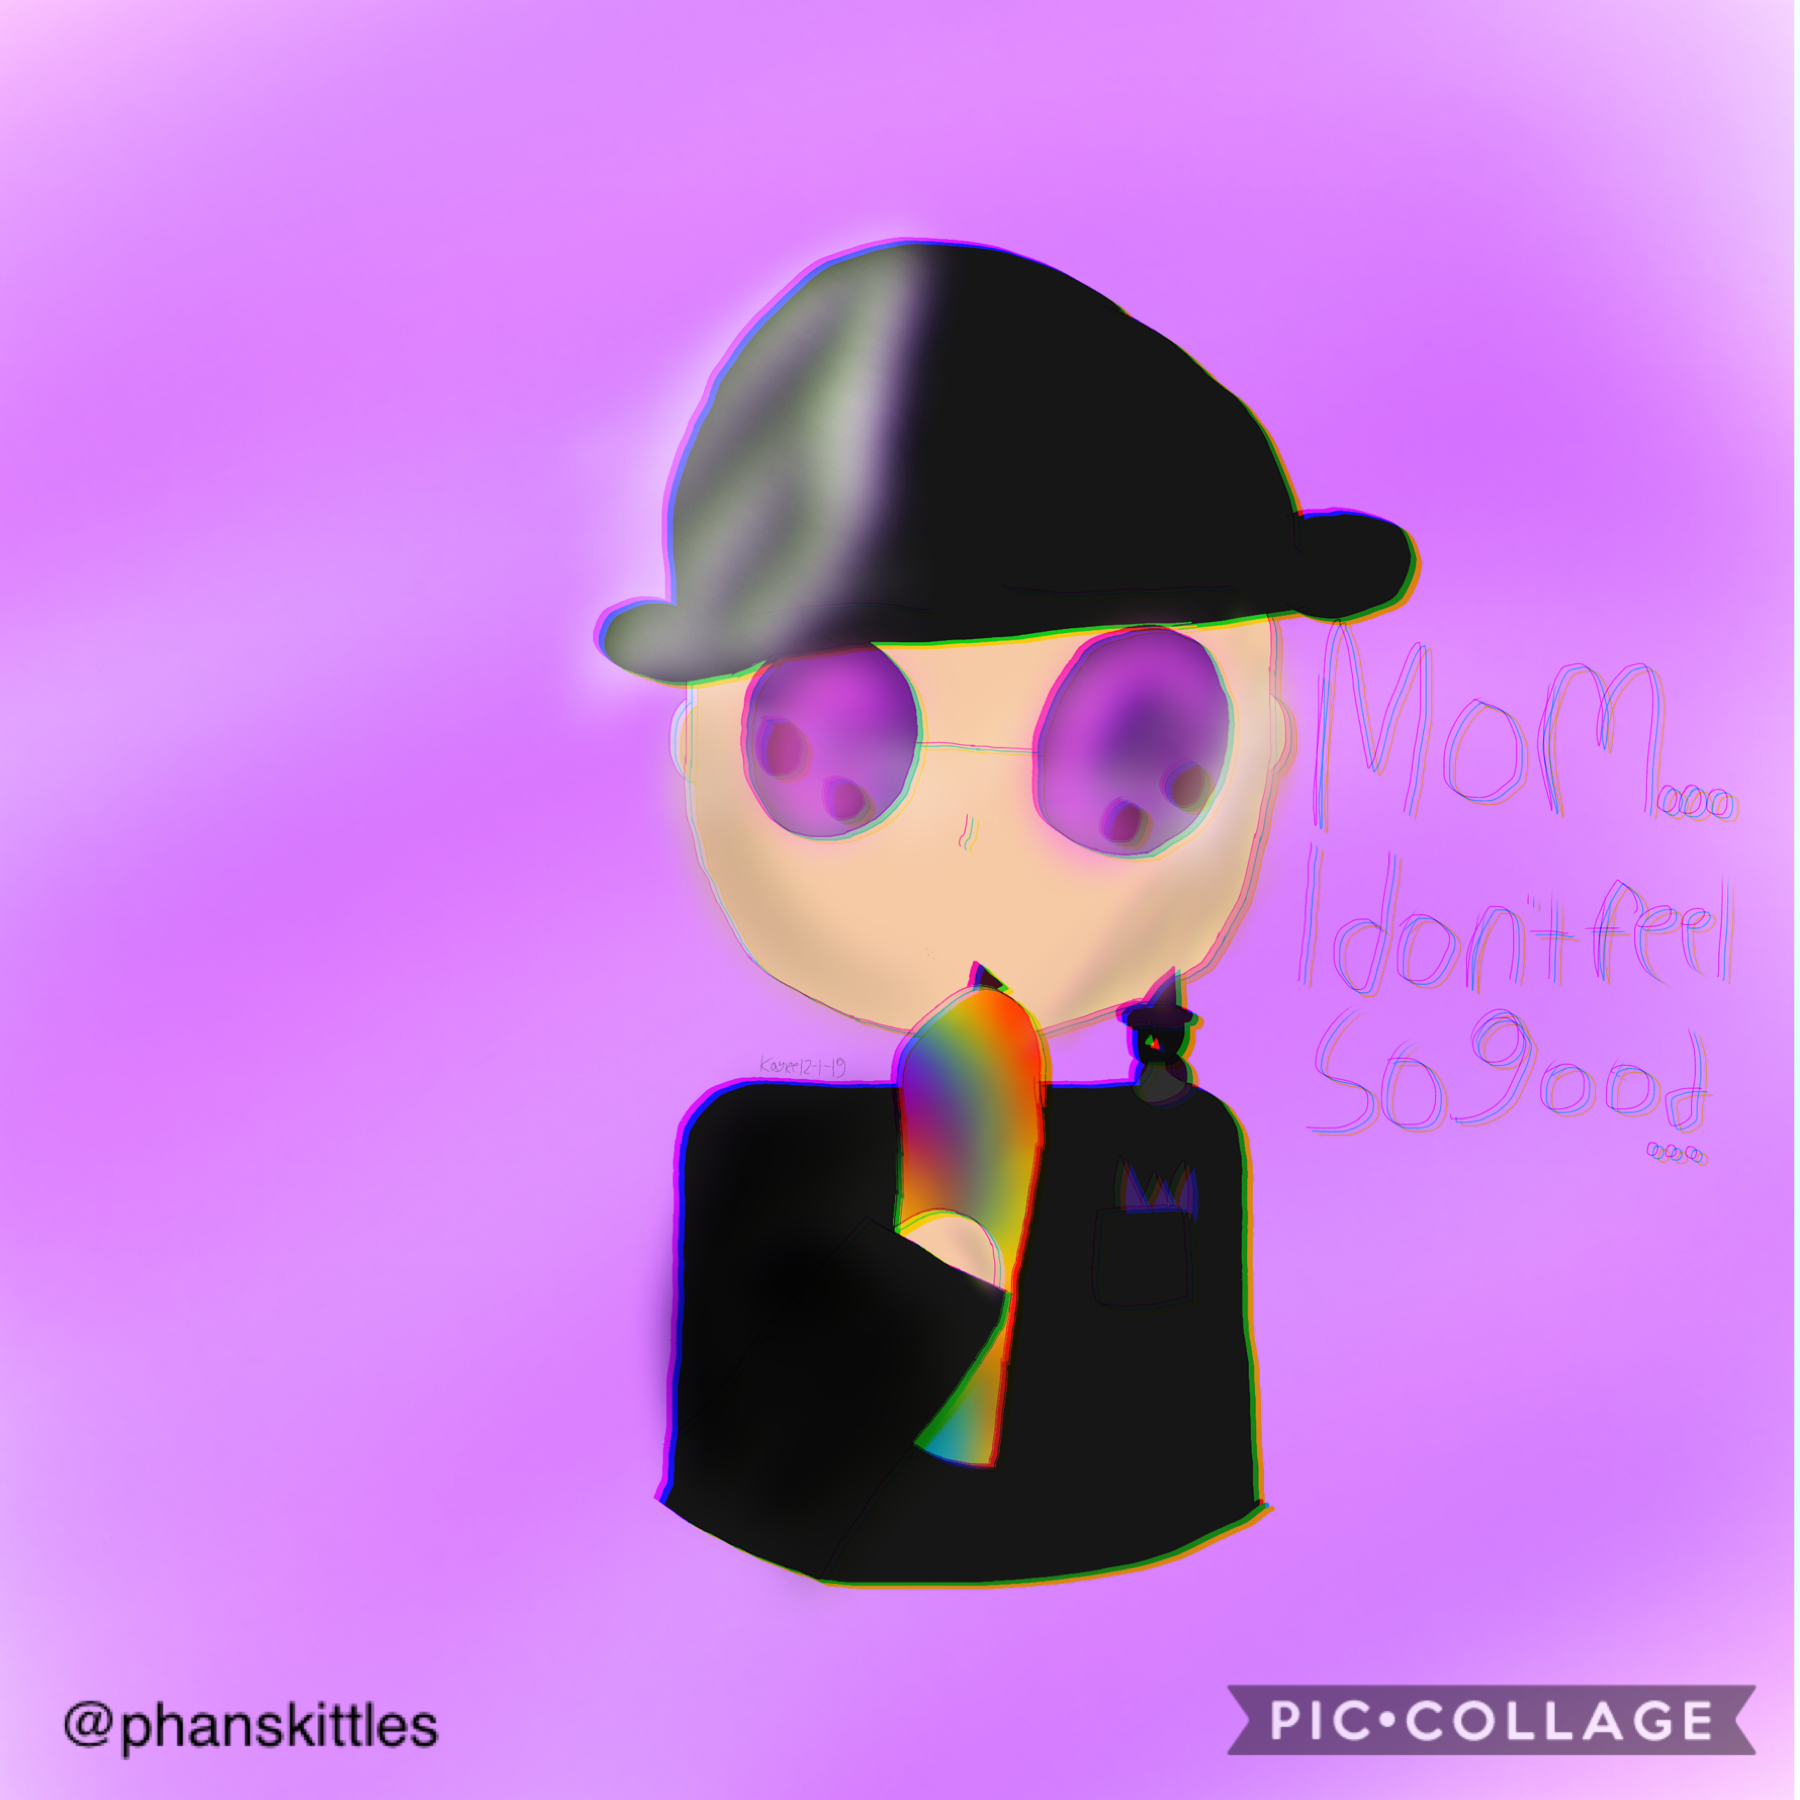 💕 Tap 💕 
This is Fave/ROBLOXFave, this one is a little bit awkward but I’m kinda proud of it! I’ve been getting into art a lot lately, so expect me to post more often as I am sharing my art ^_^